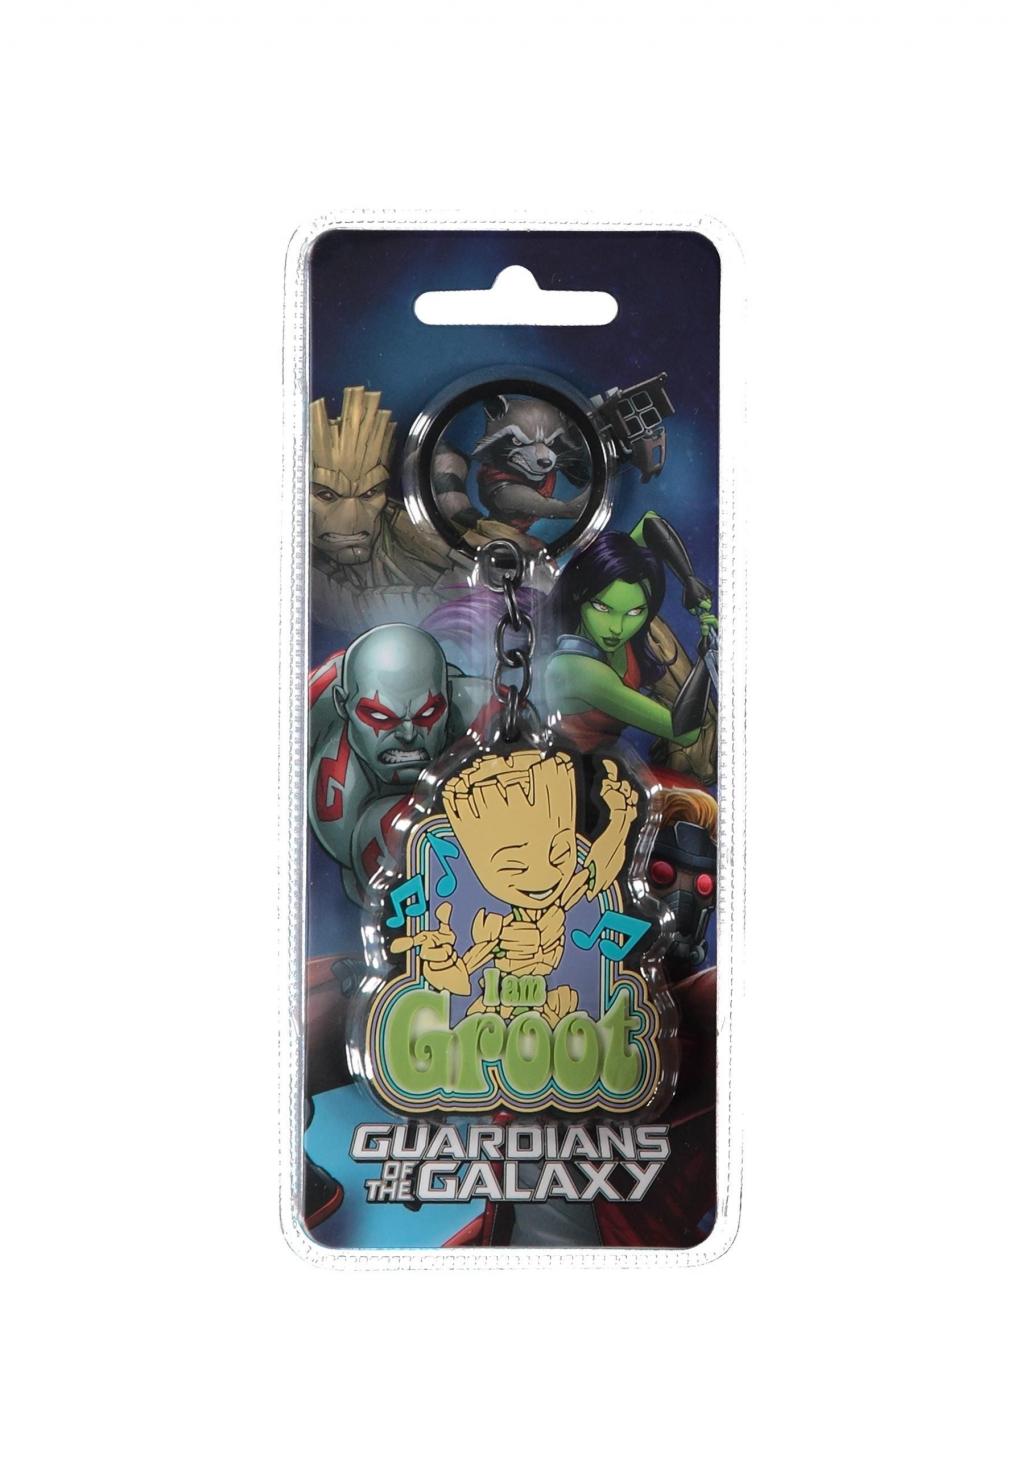 MARVEL - Groot - Rubber Keychain